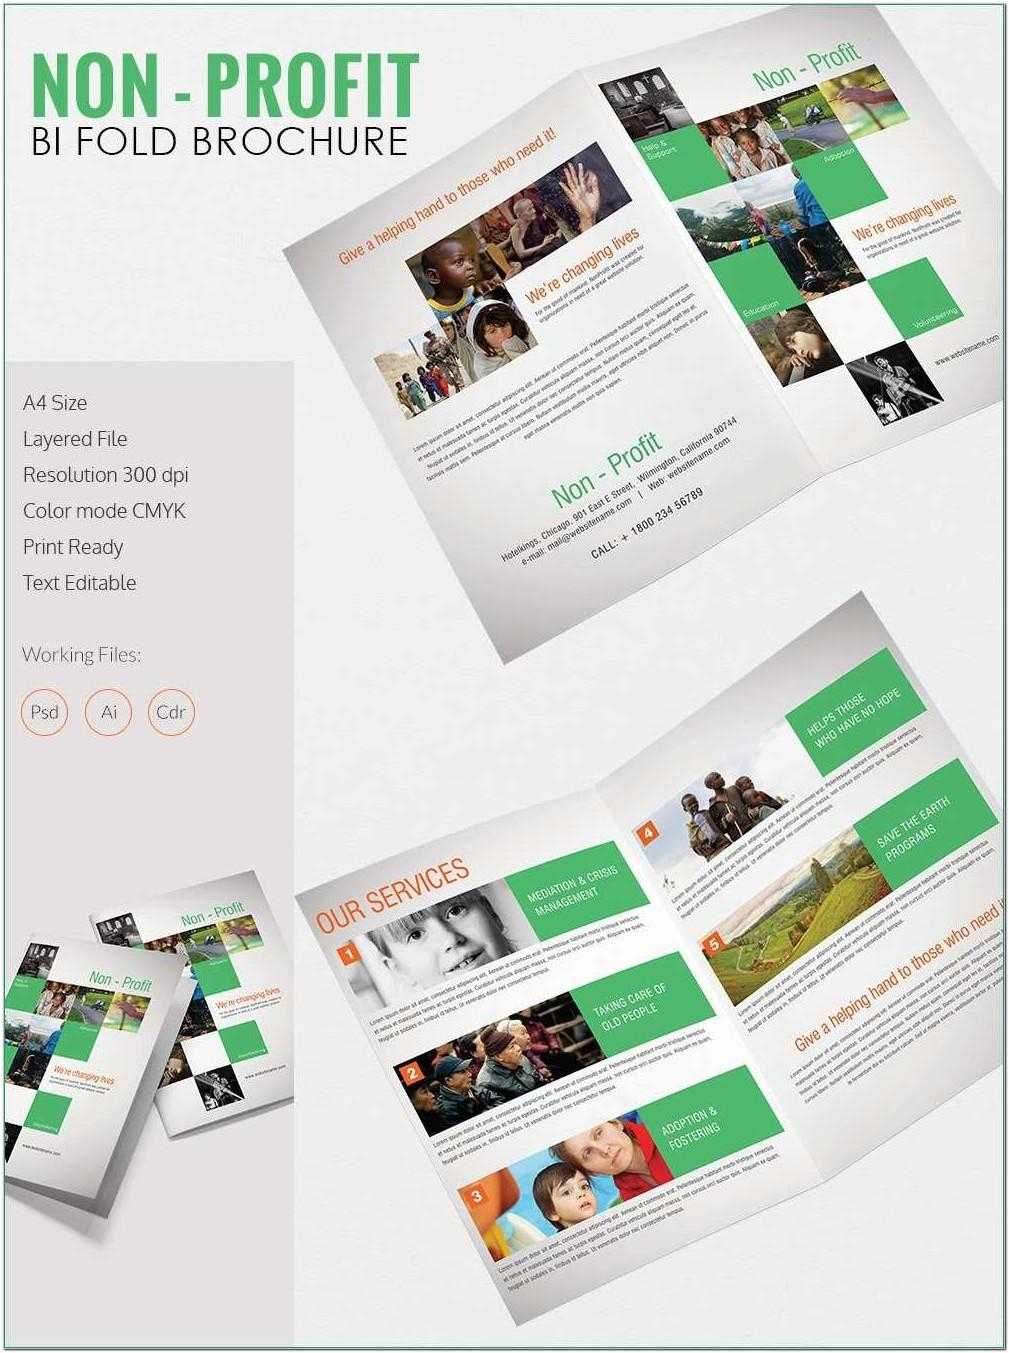 2 Fold Brochure Template Free Download Publisher – Template With 2 Fold Brochure Template Free